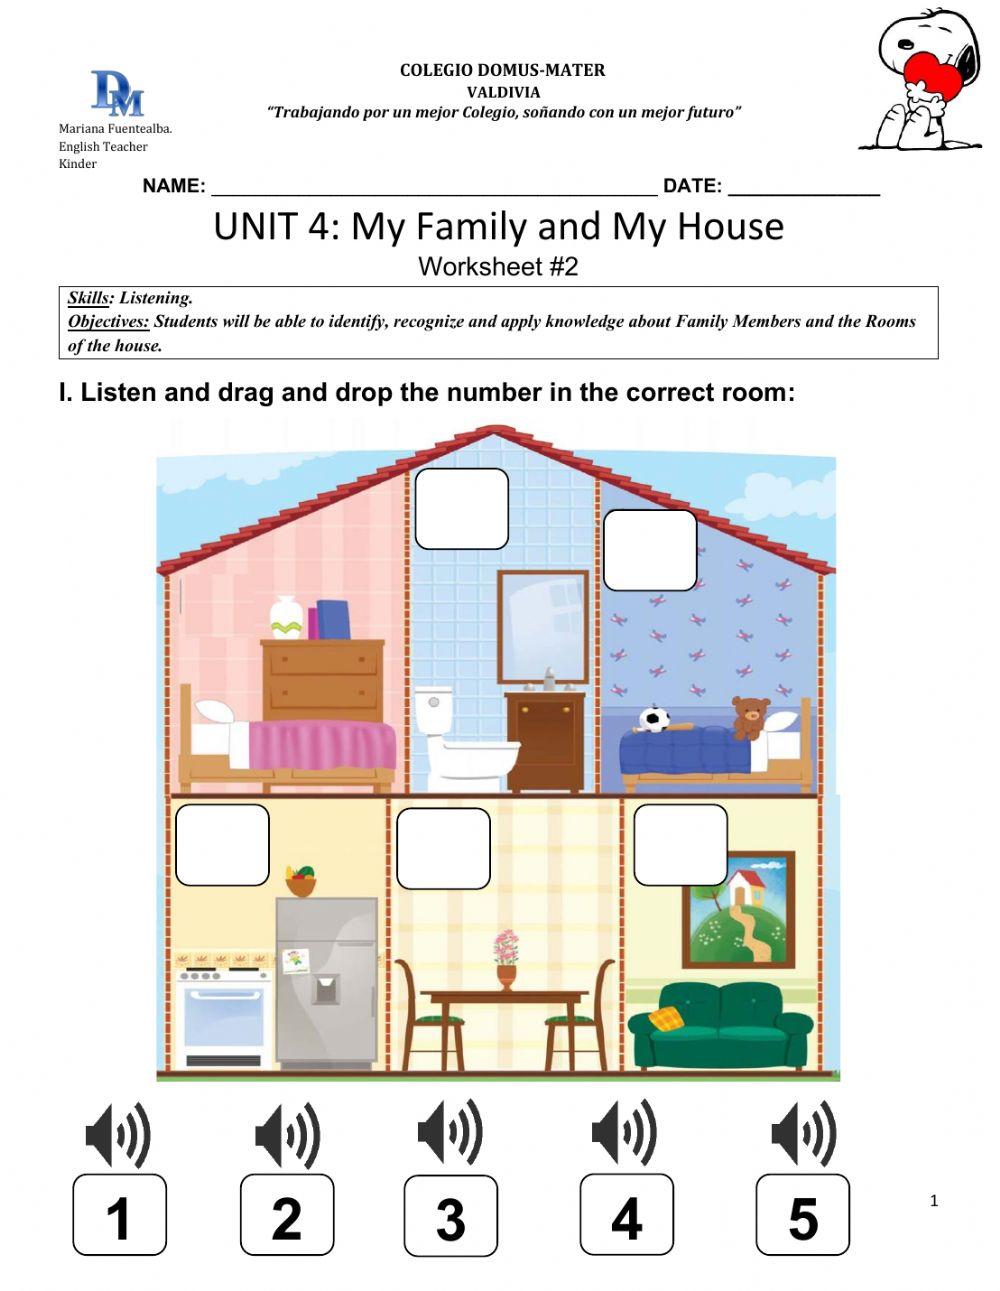 Unit 4: My Family and My House